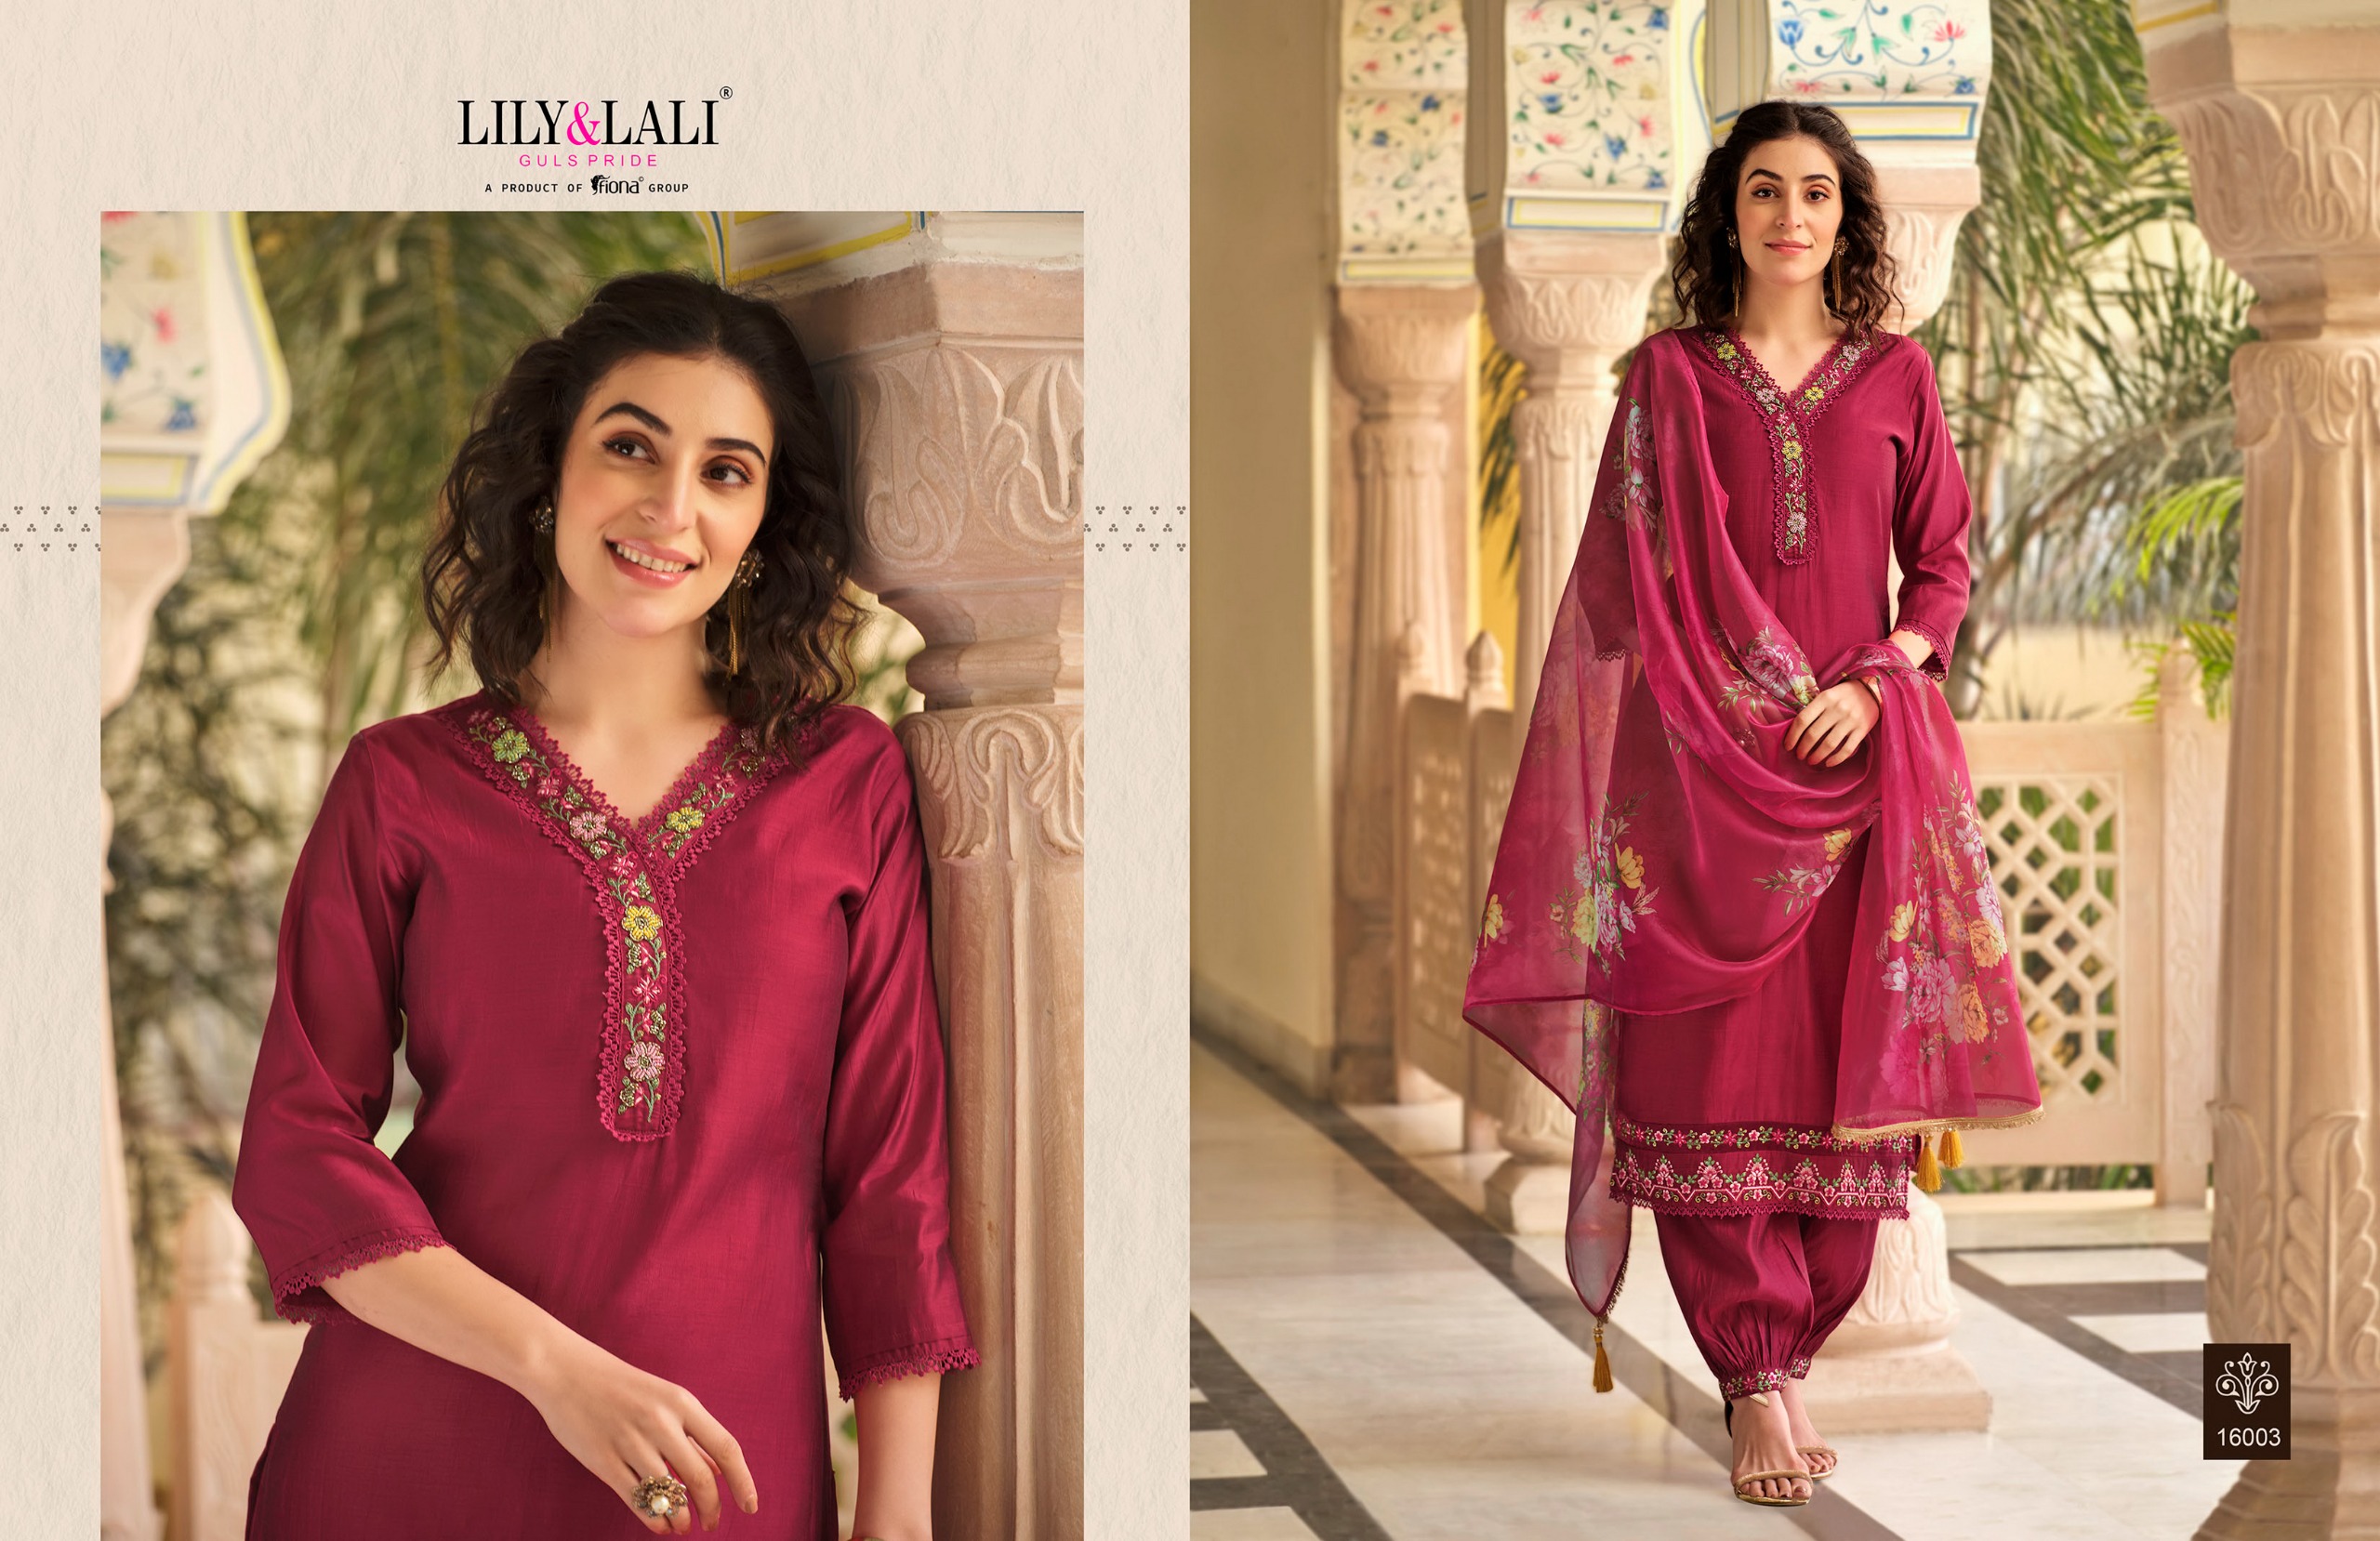 Lily And Lali Afghani Vol 2 collection 3